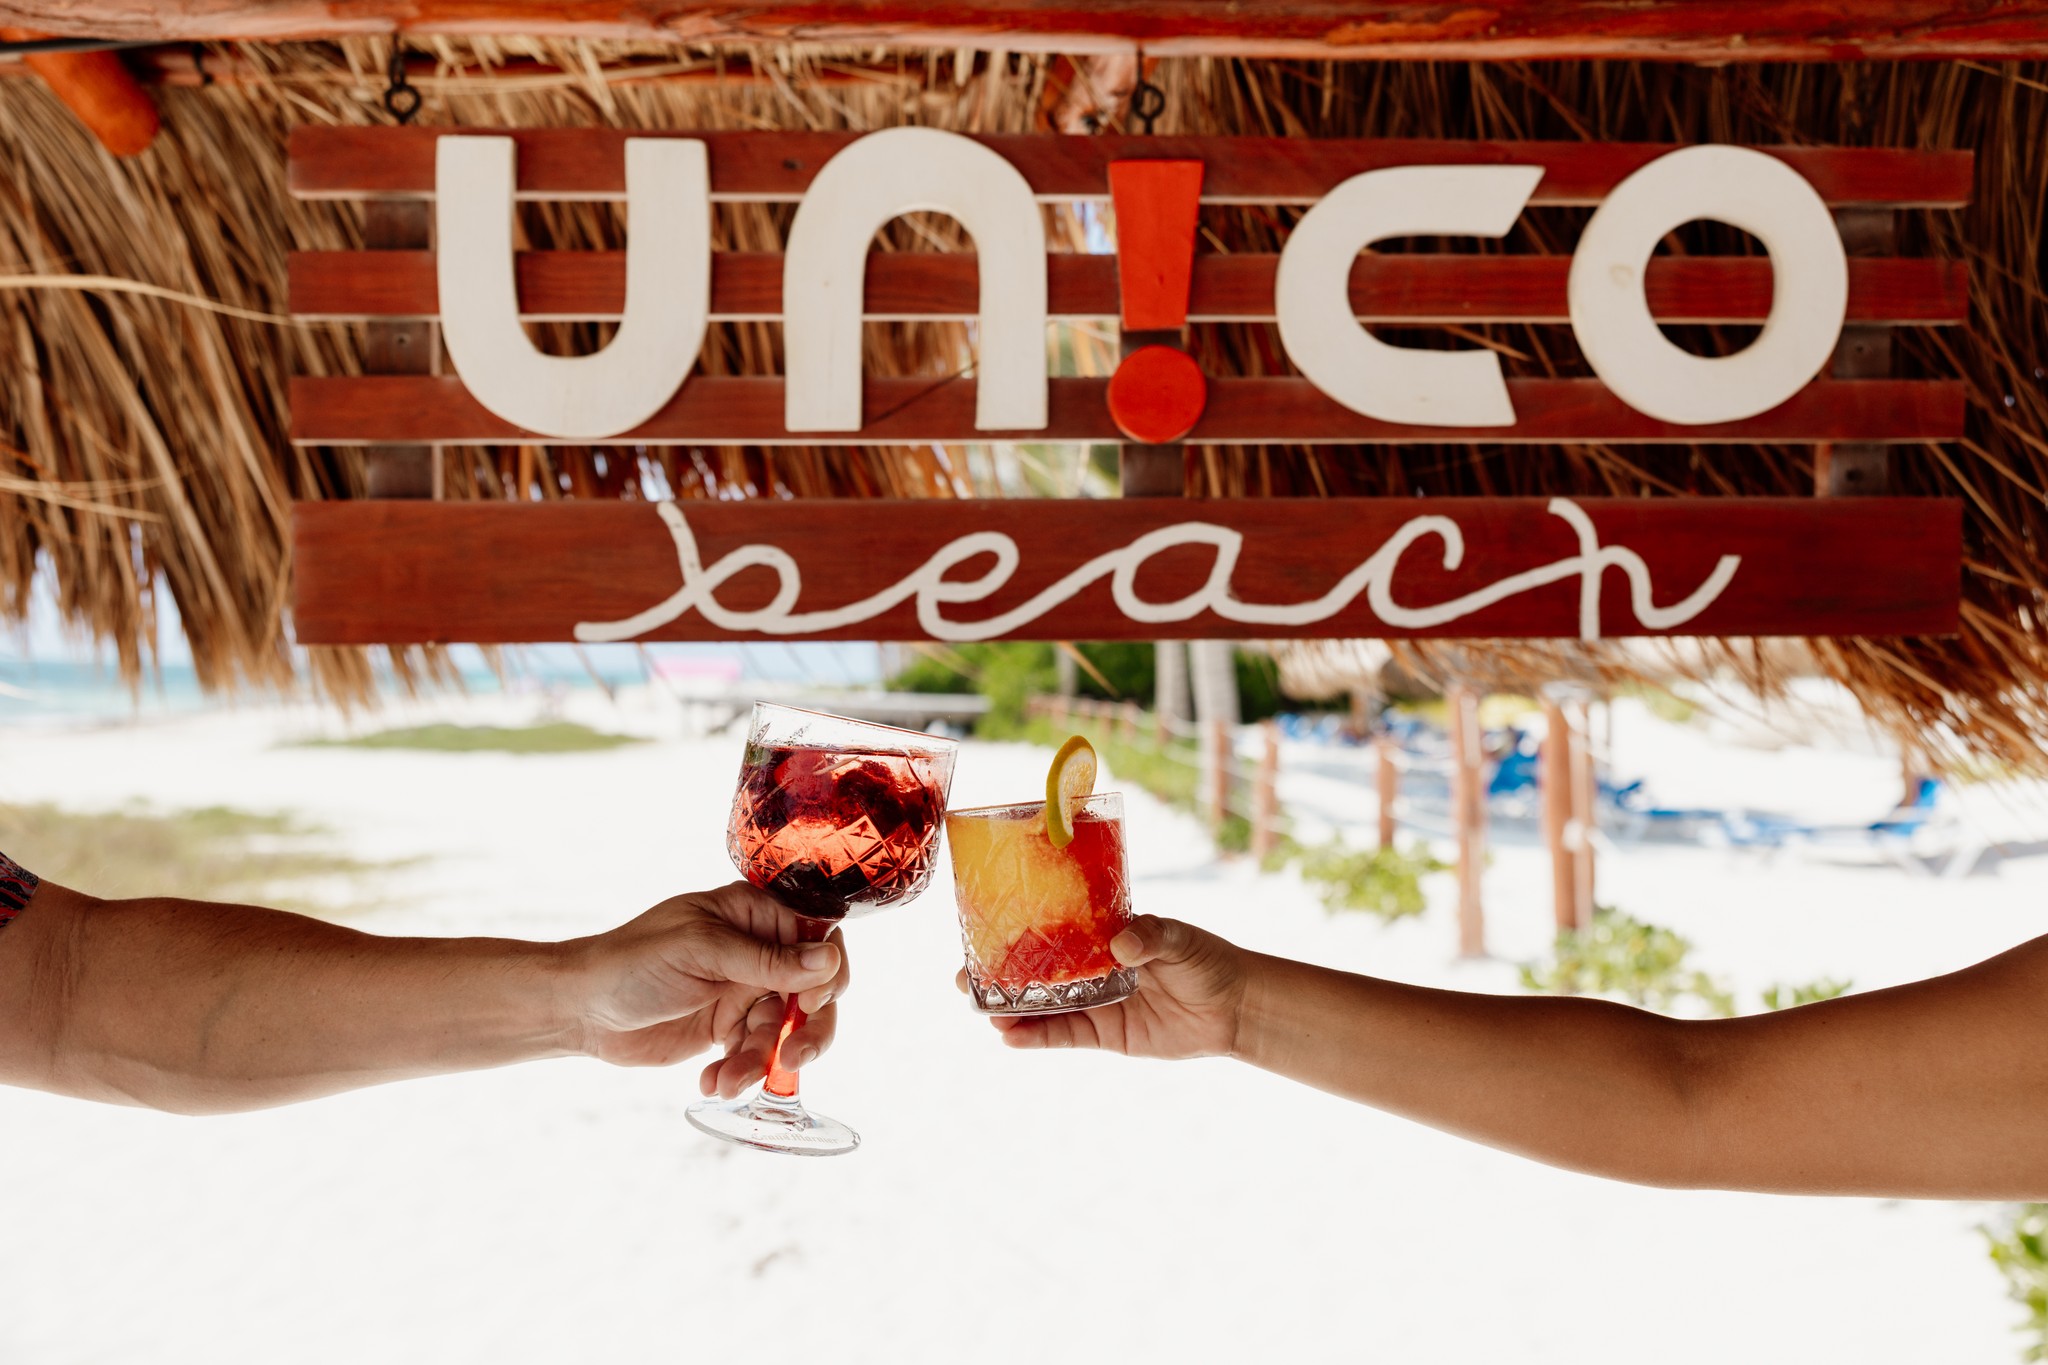 Two people holding cocktails in front of the Unico Beach sign.